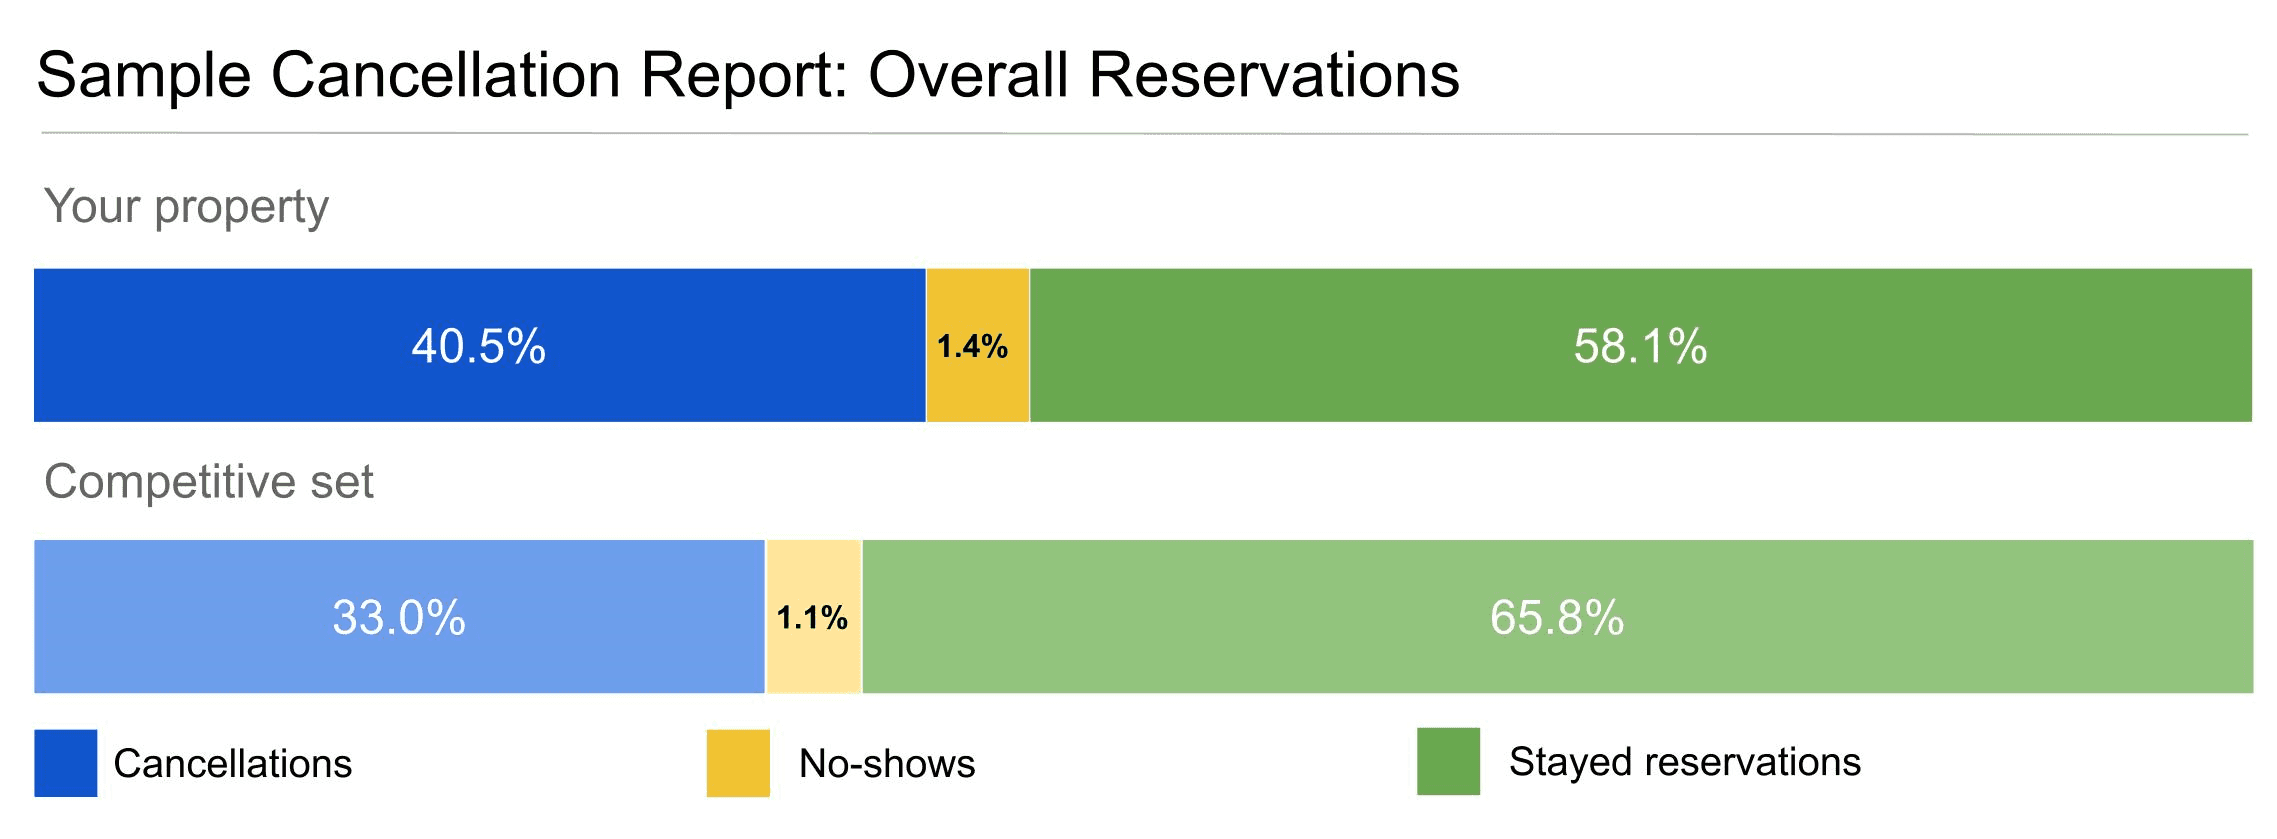 The overall reservations report compared to the results of a competitive set